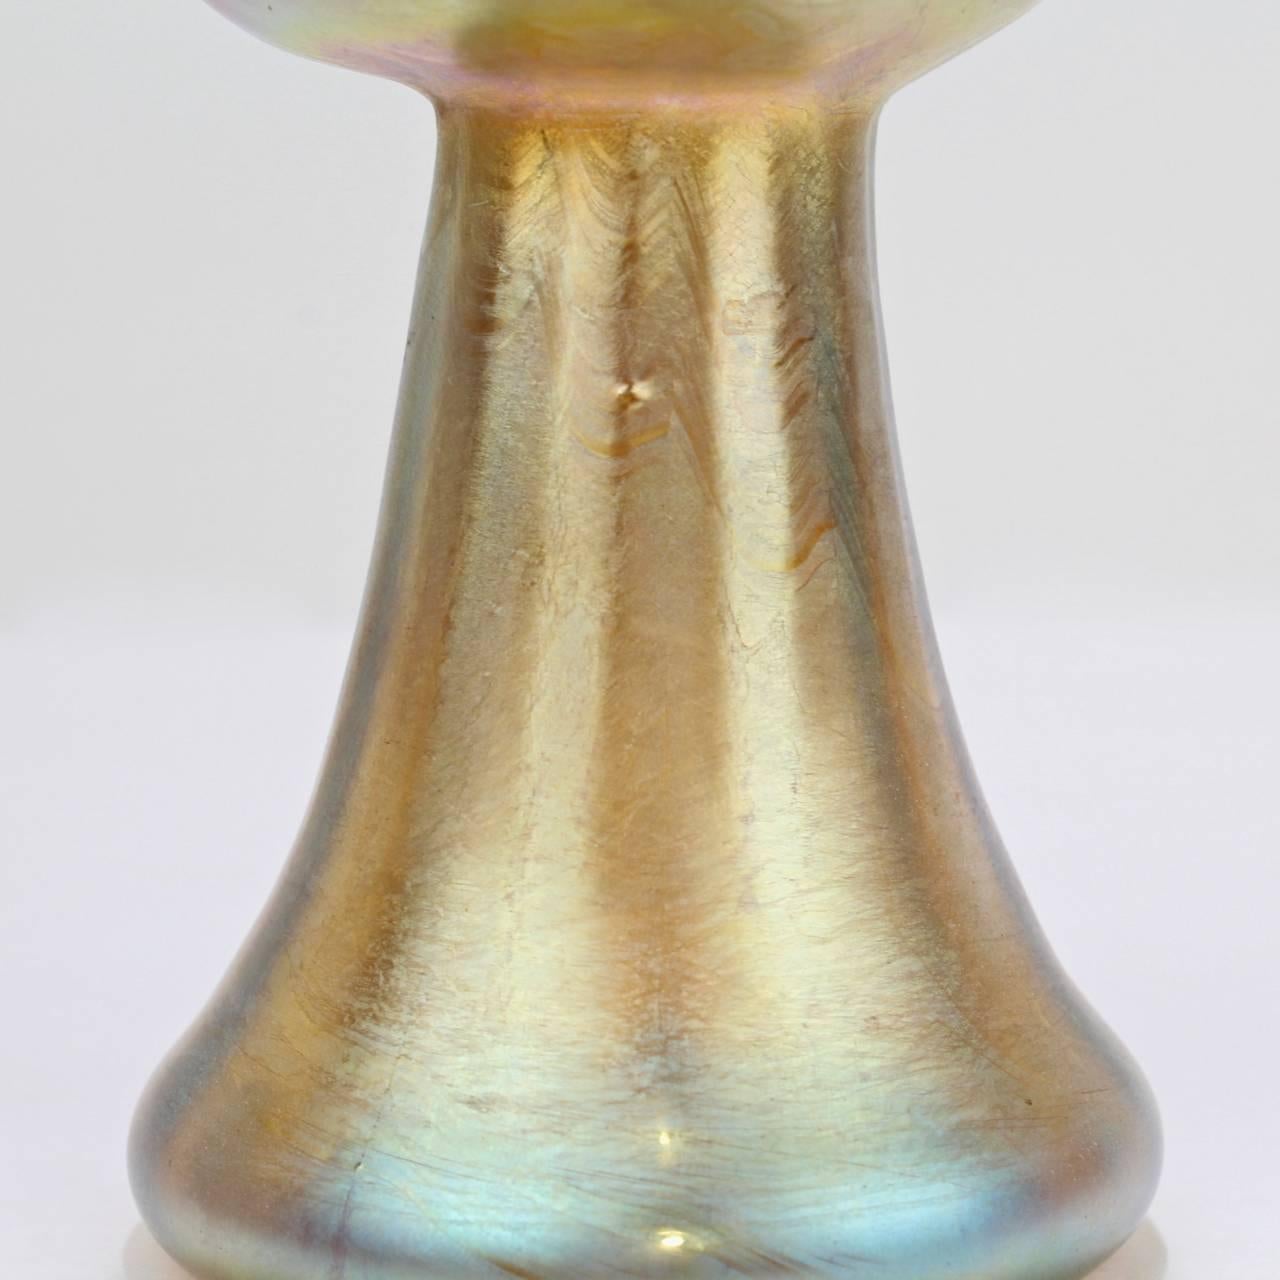 American Labeled Antique Tiffany Favrile Iridescent Art Glass Vase